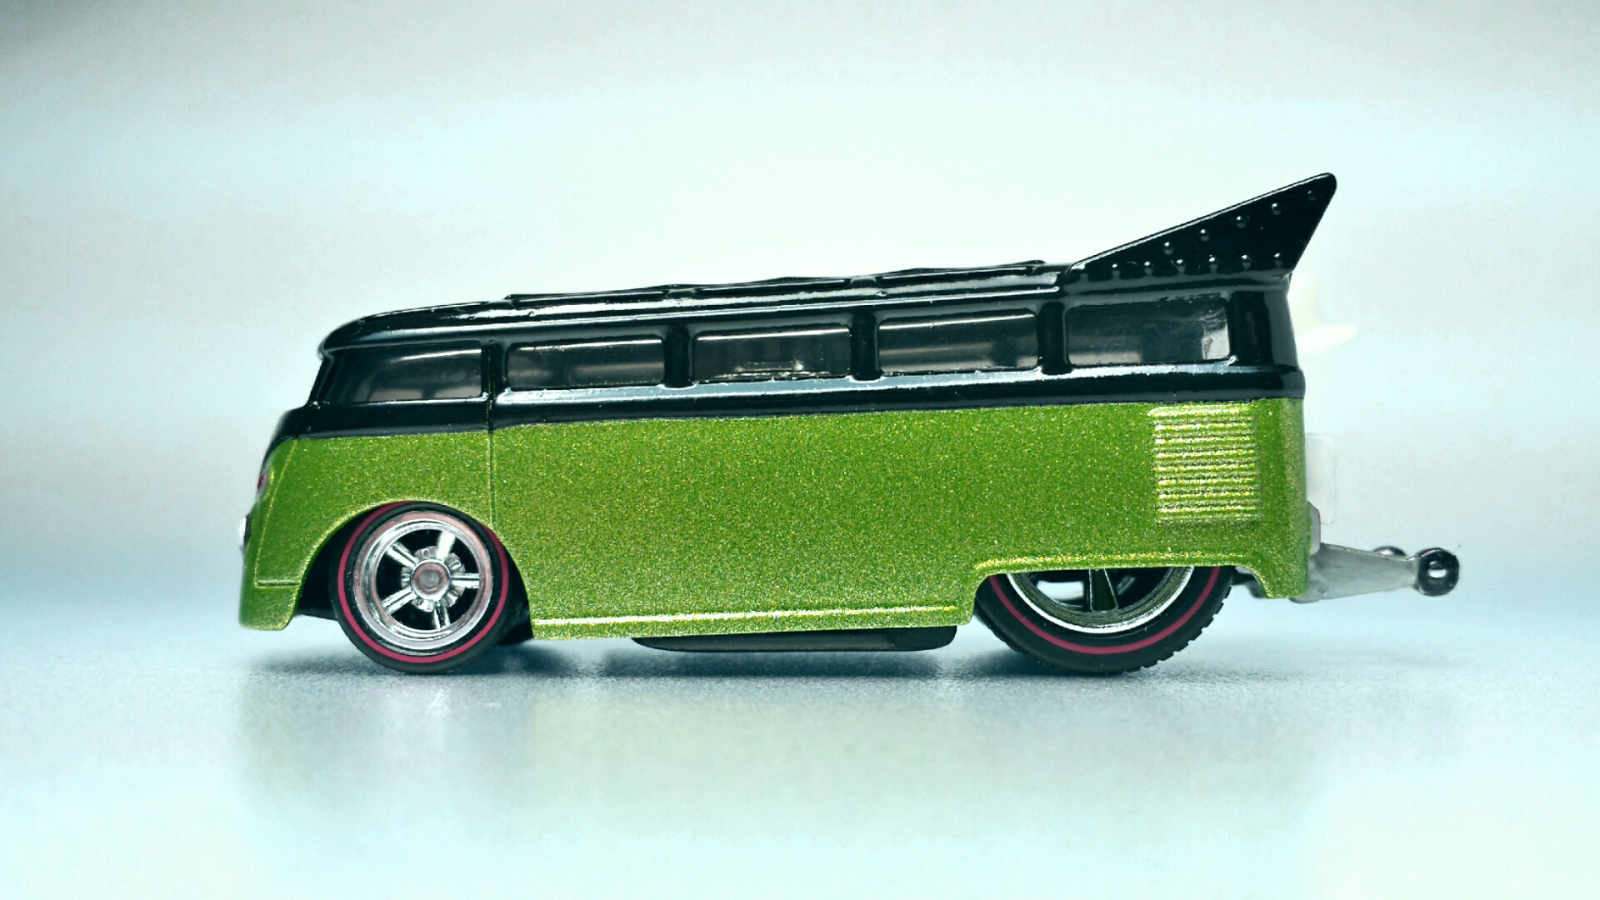 Illustration for article titled Teutonic Tuesday: Custom VW Drag Bus